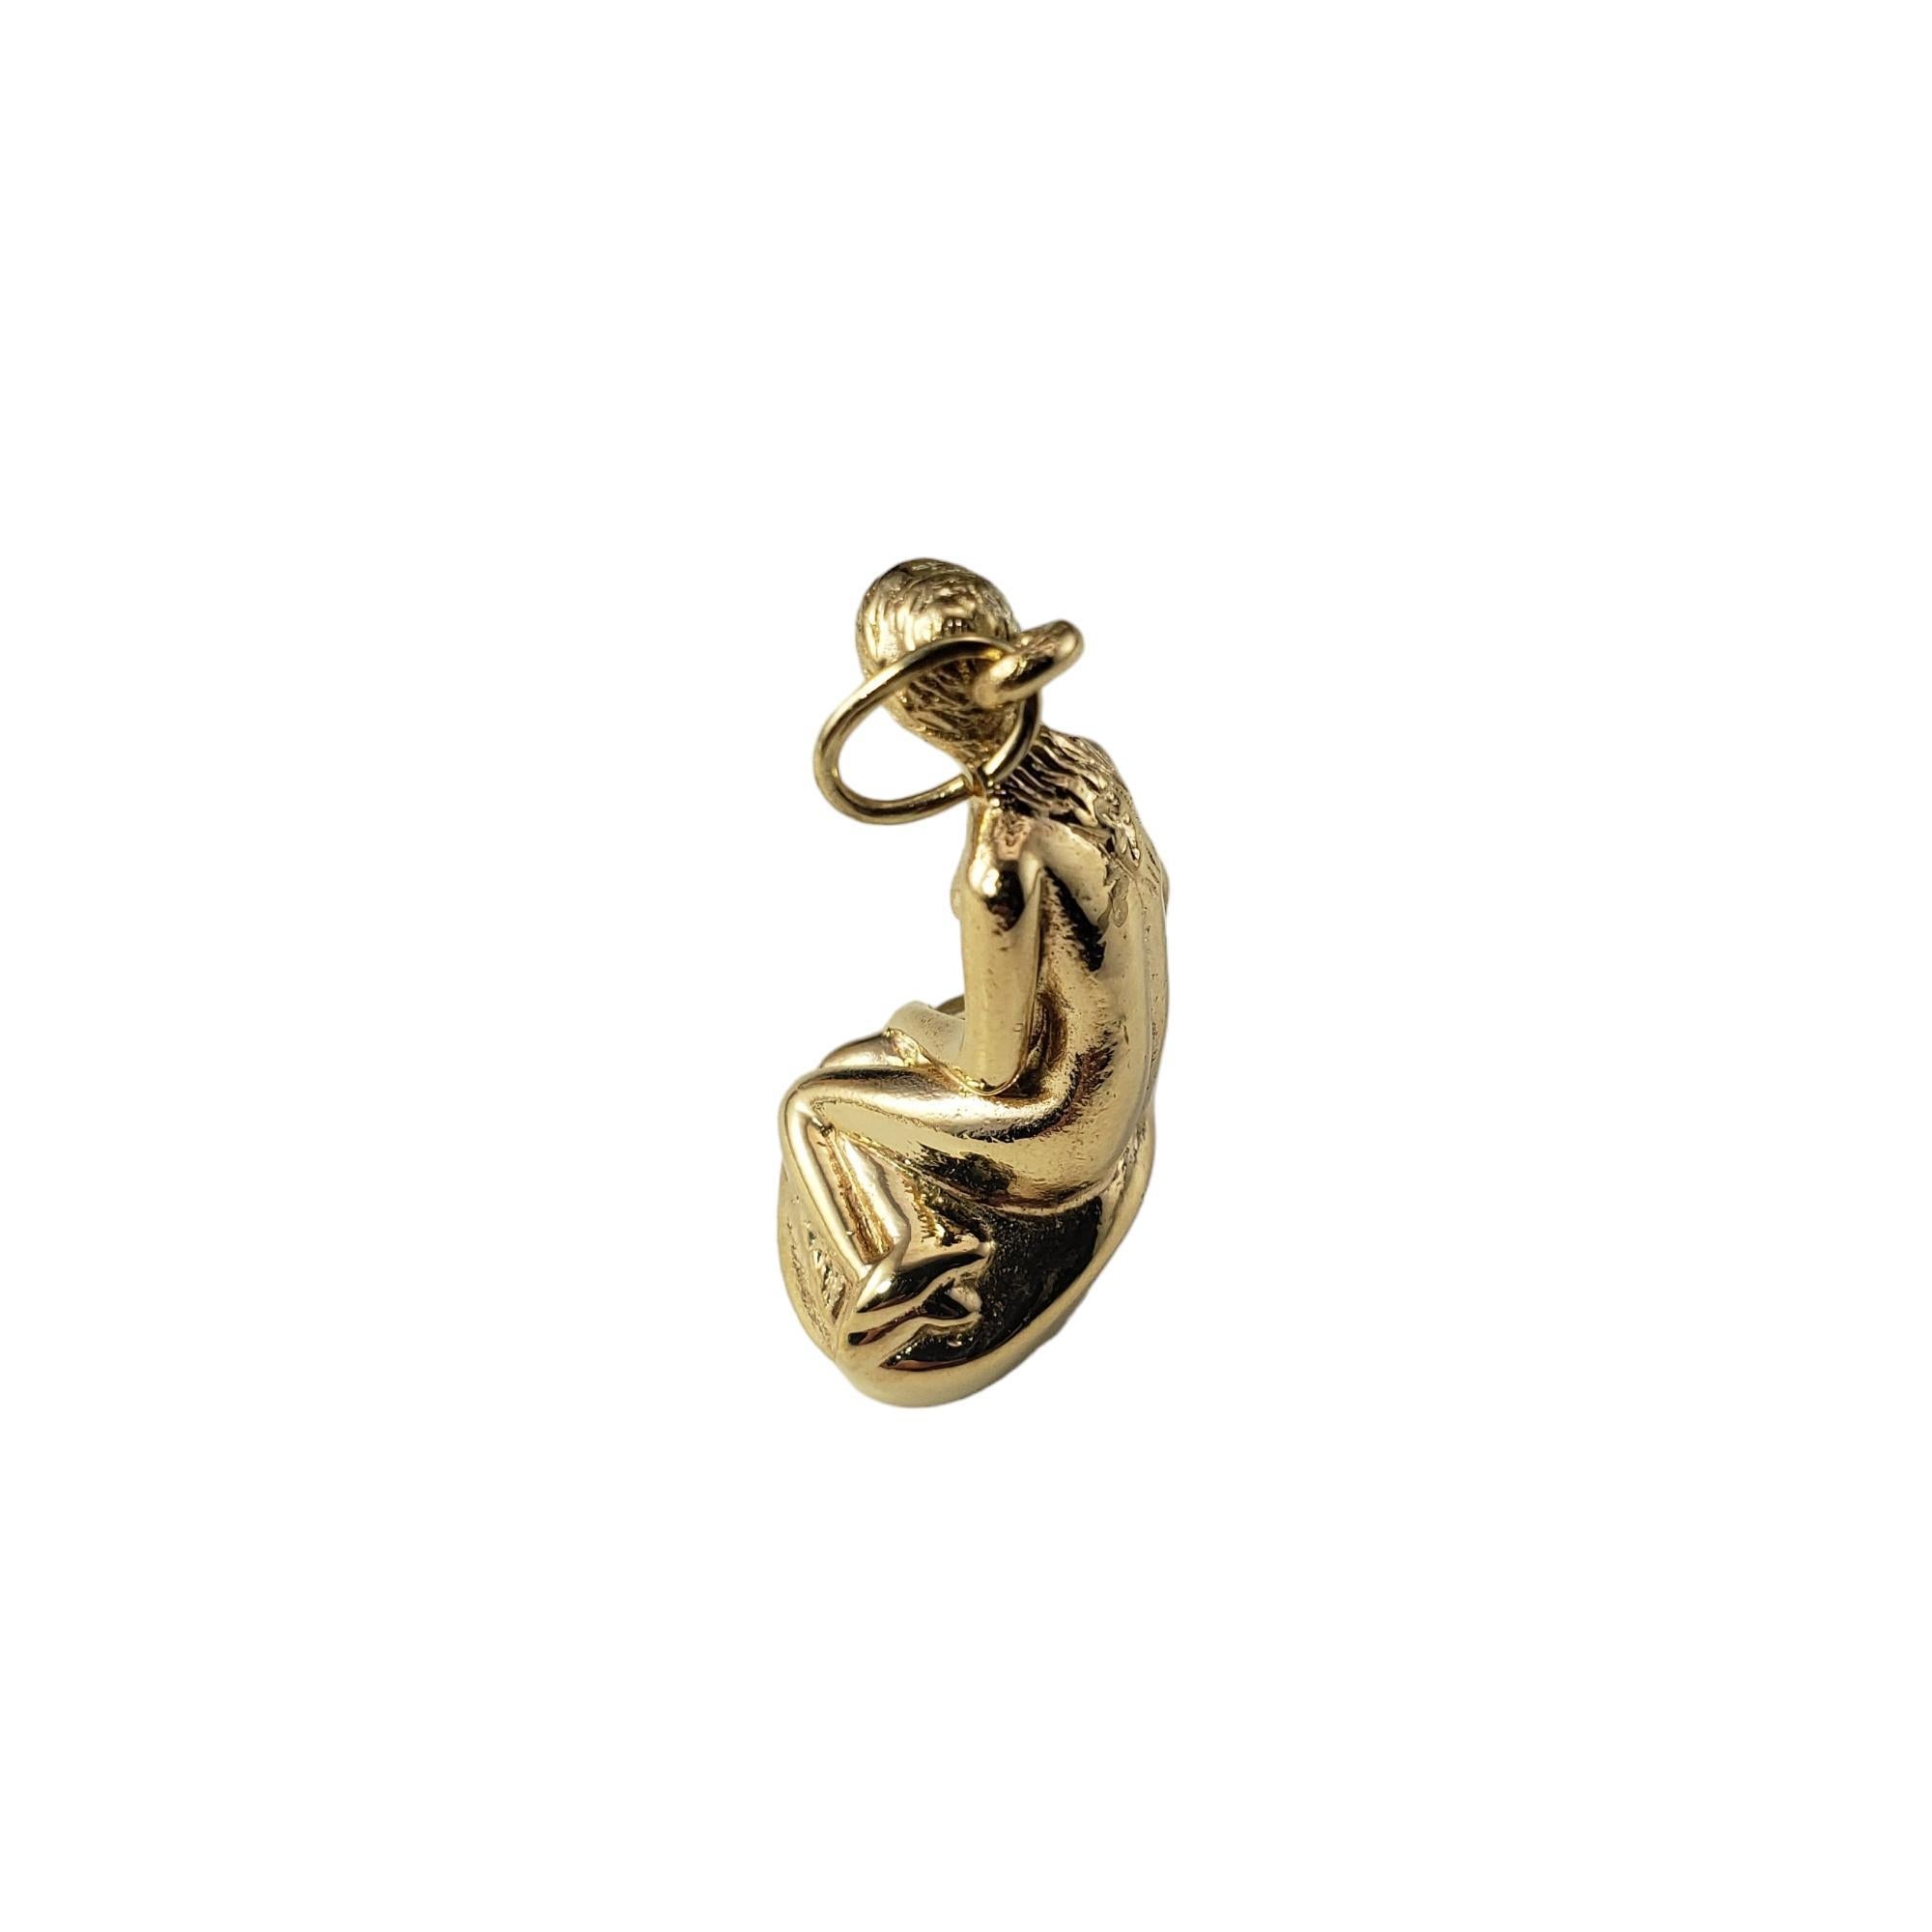 Vintage 14 Karat Yellow Gold Denmark Little Mermaid Charm-

The Little Mermaid statue in Denmark honors Danish author Hans Christian Anderson who wrote the Little Mermaid fairy tale.  

This lovely 3D charm is crafted in beautifully detailed 14K